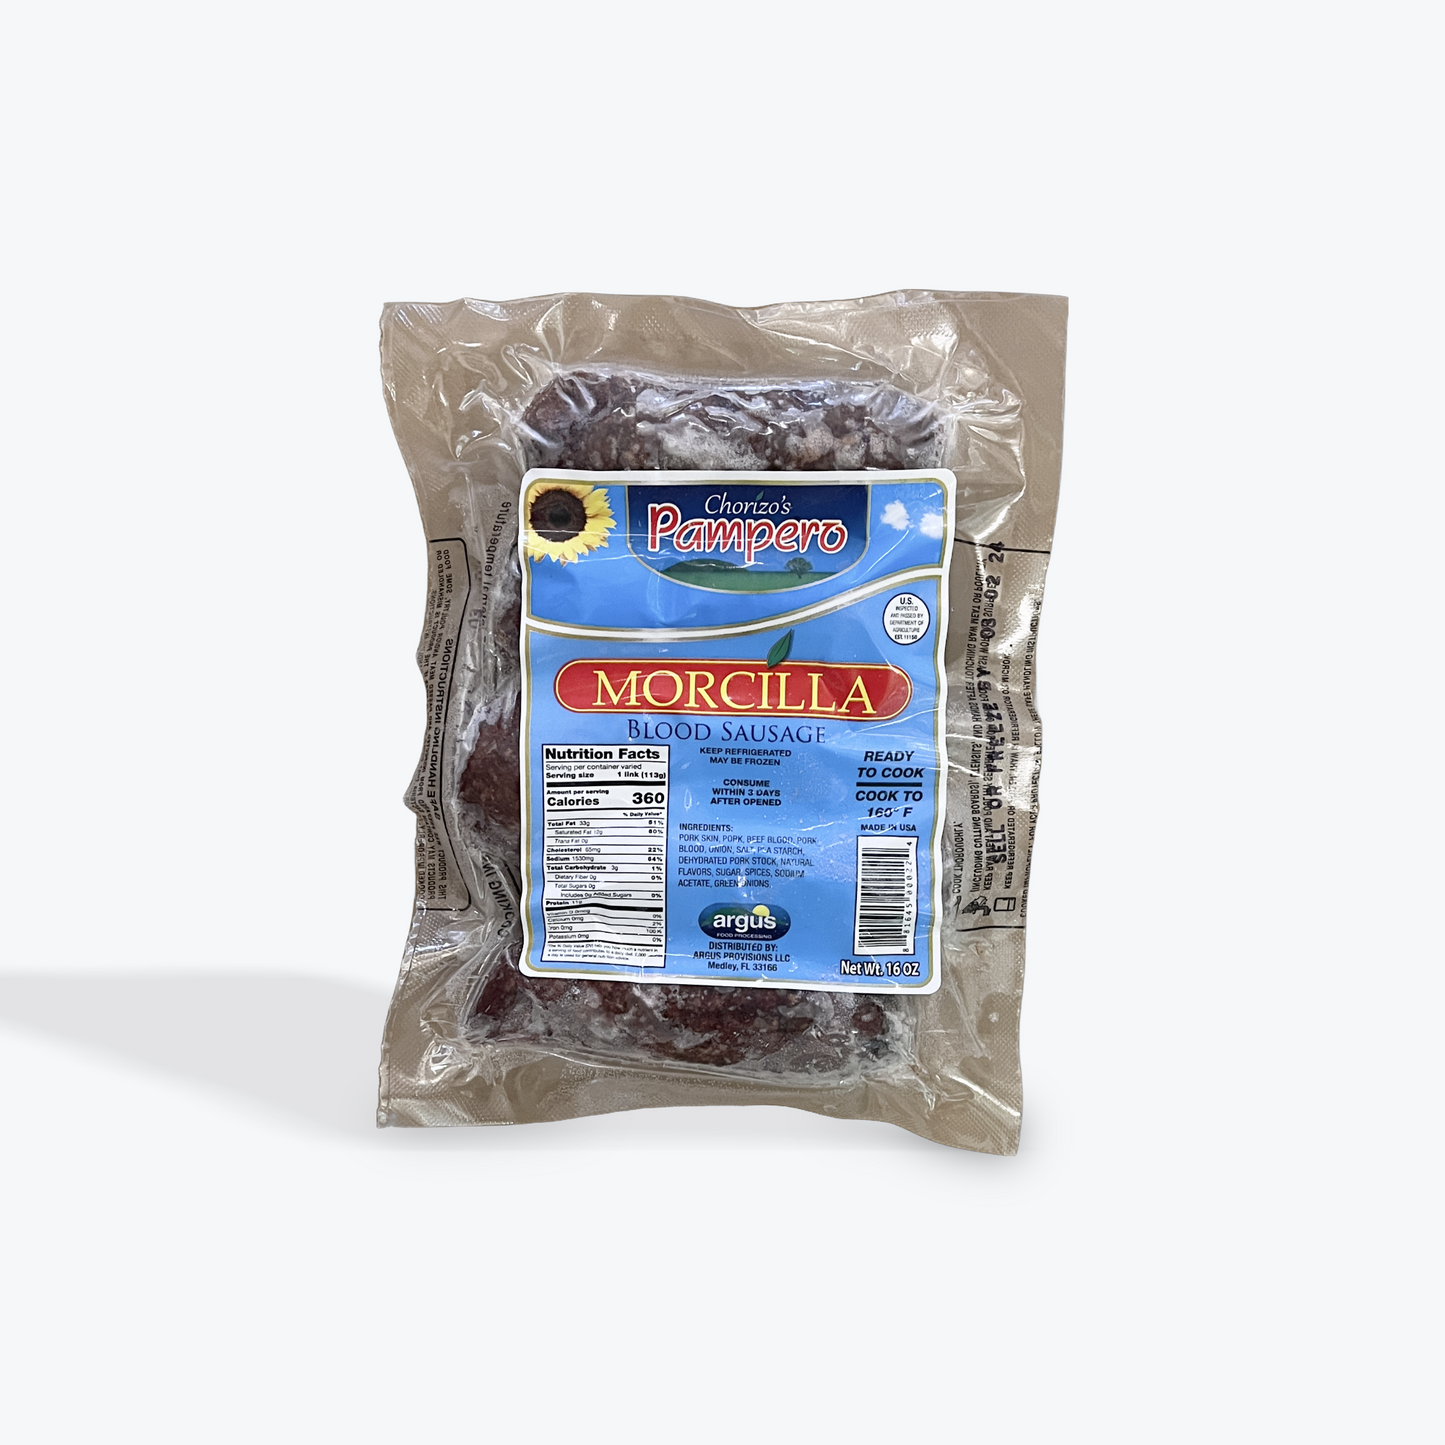 Pampero - Morcilla Argentina, 16 oz, Pack with 5